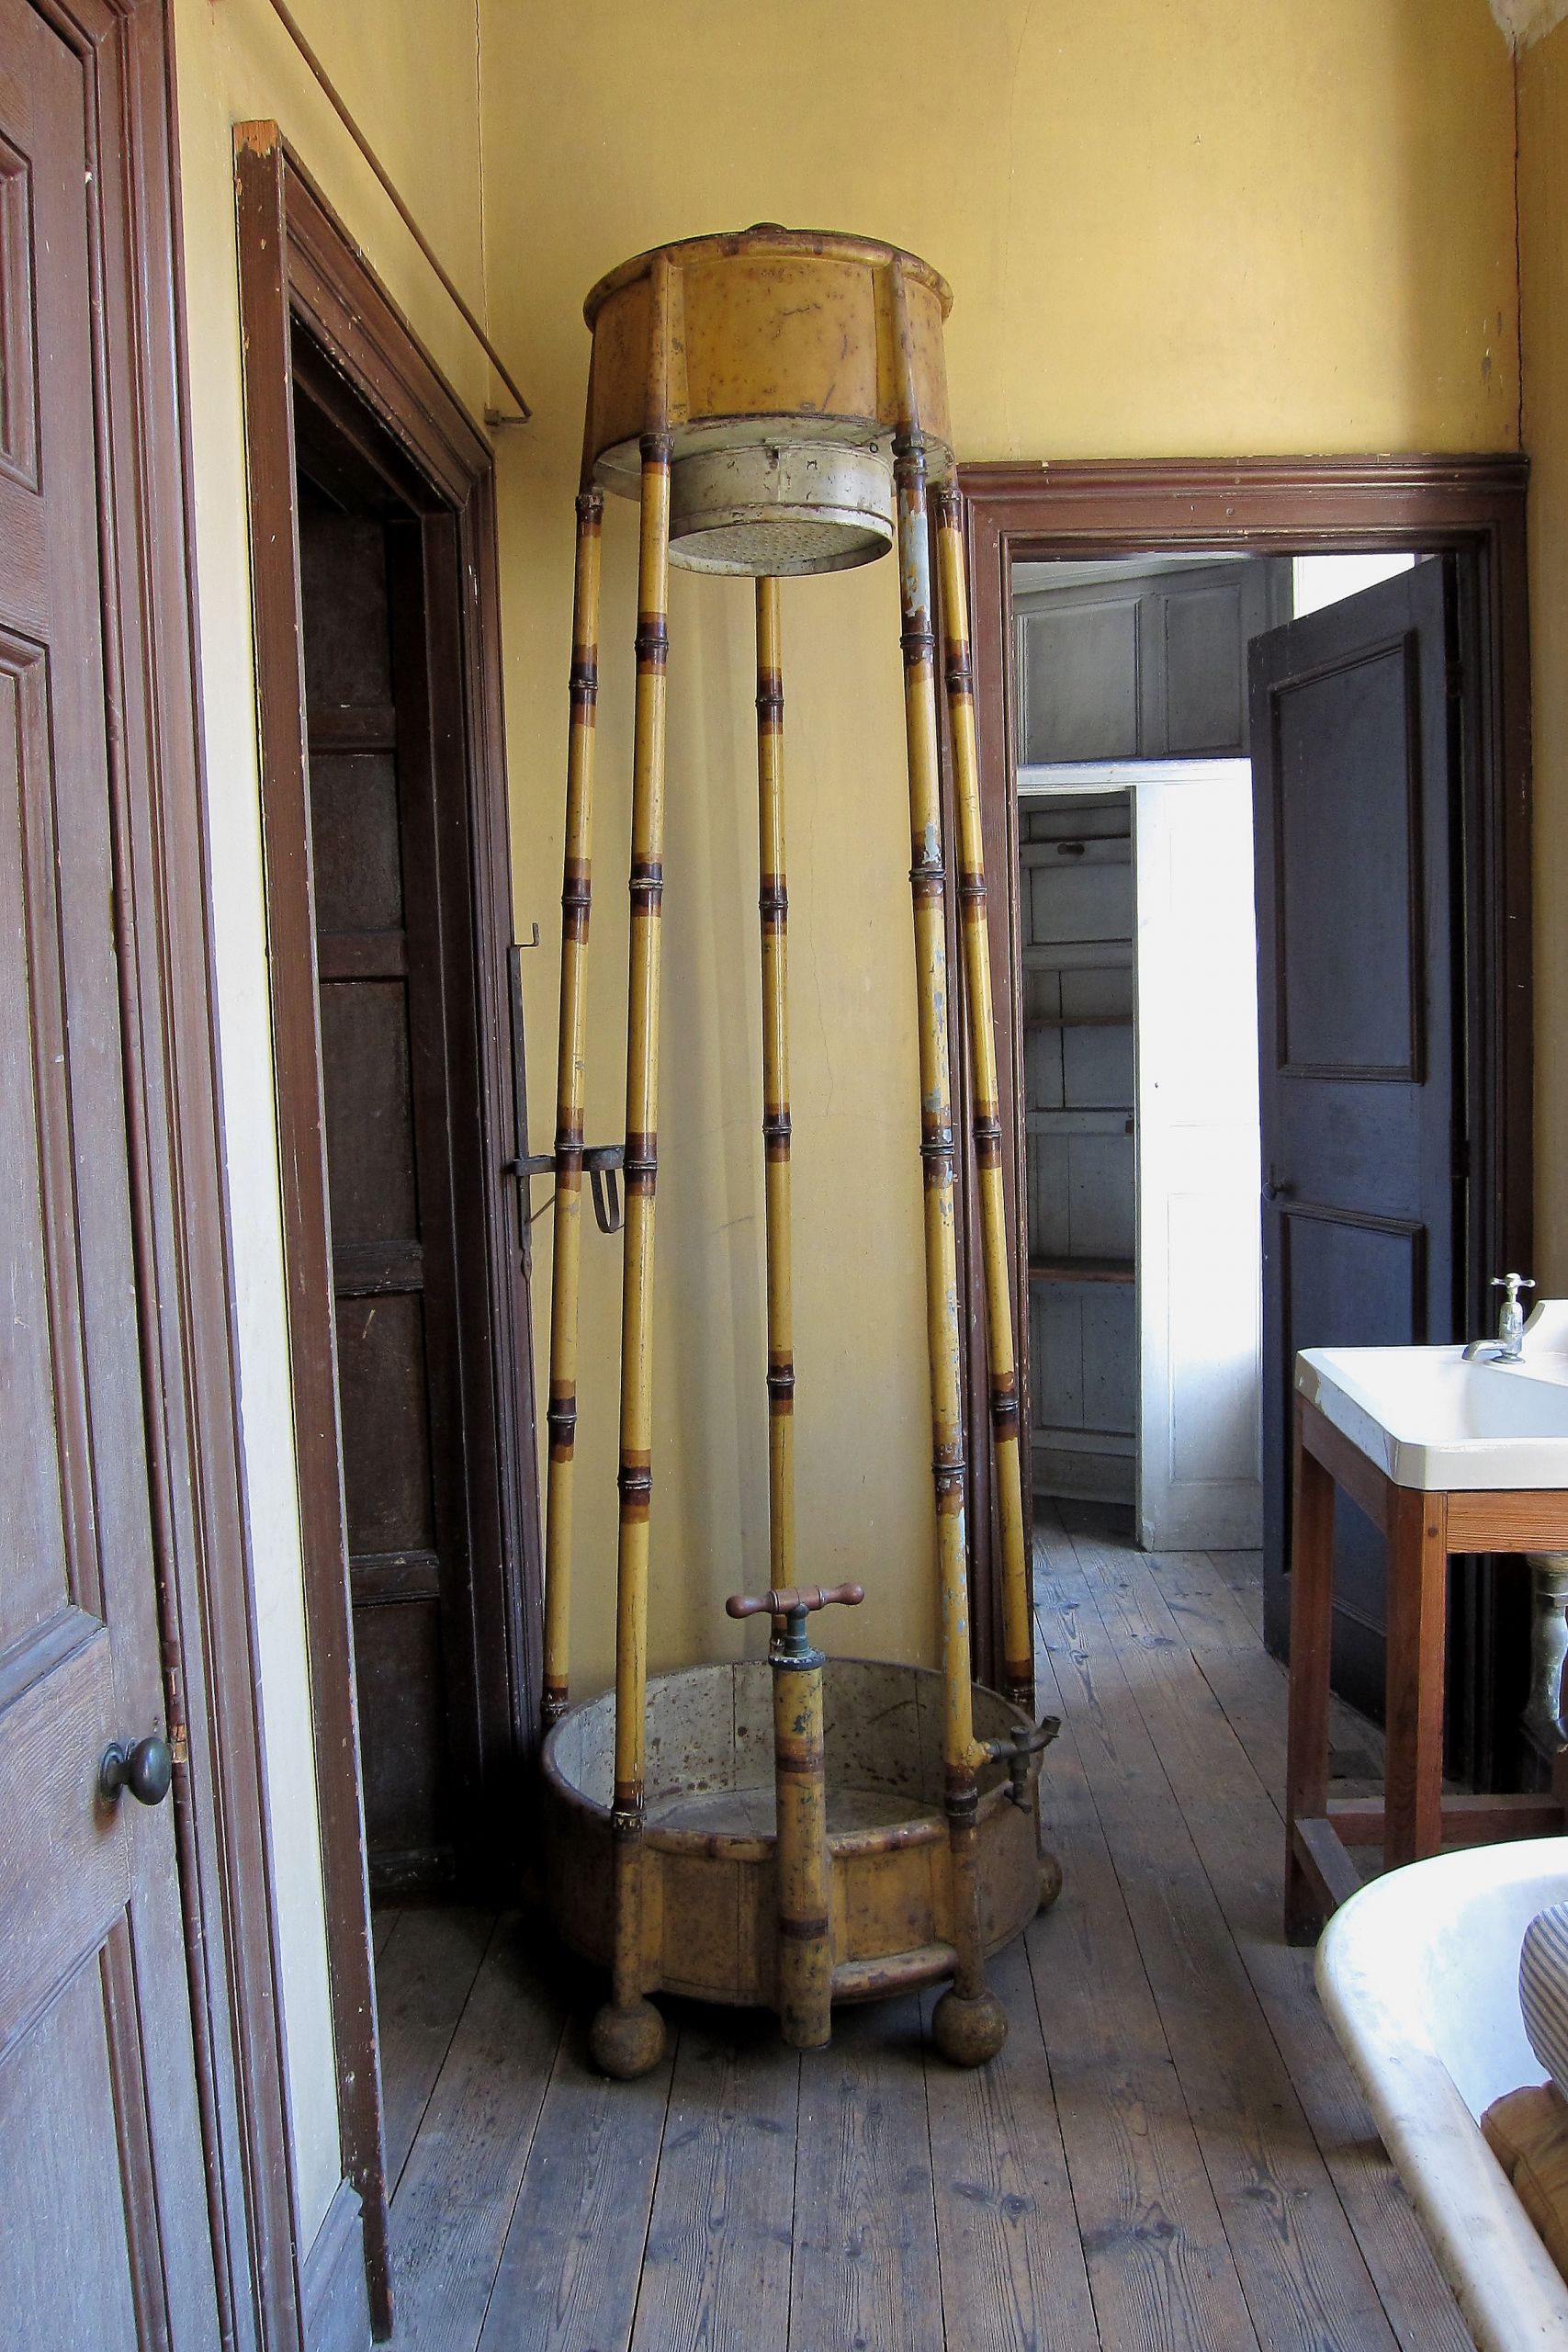 Picture Of Bathroom Showers
 File Portable Shower Calke Abbey Wikimedia mons